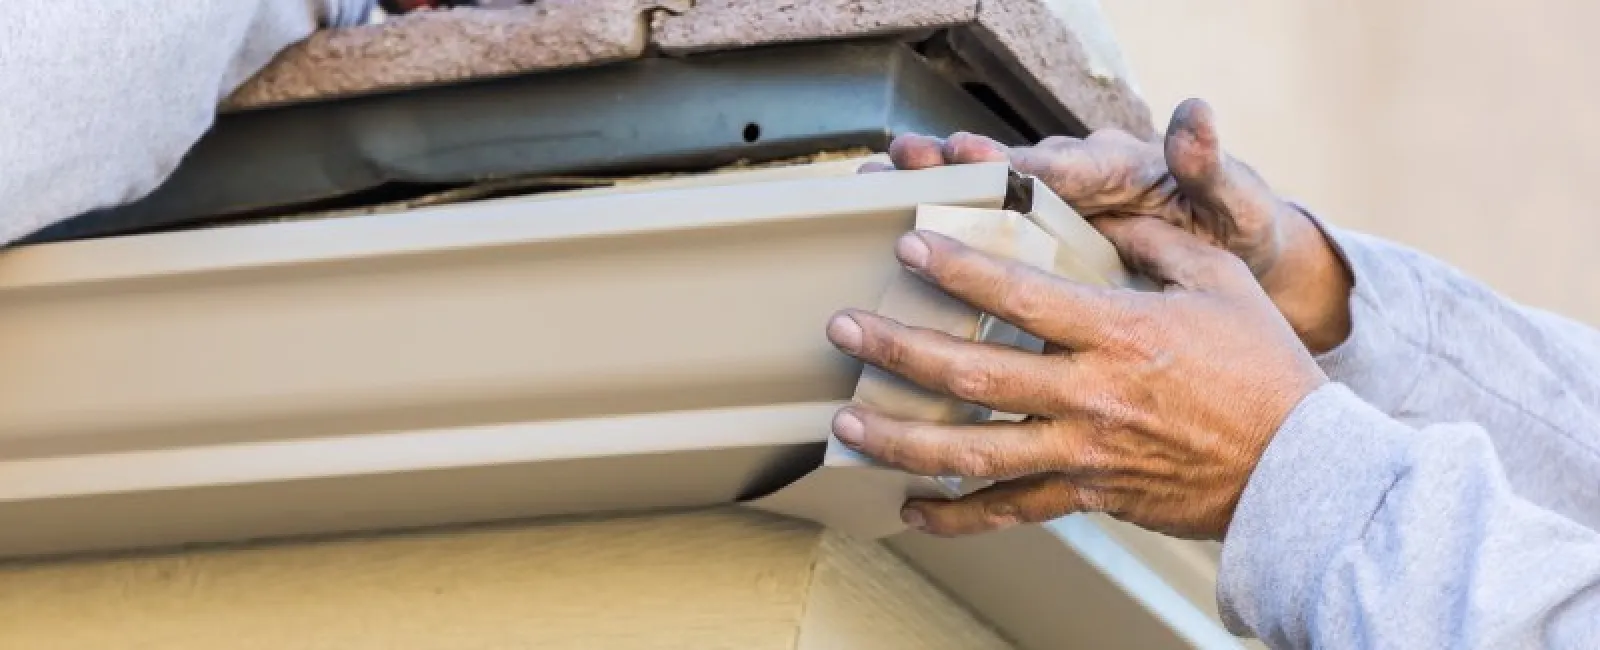 Gutter Installation: Whether to DIY or Hire a Professional